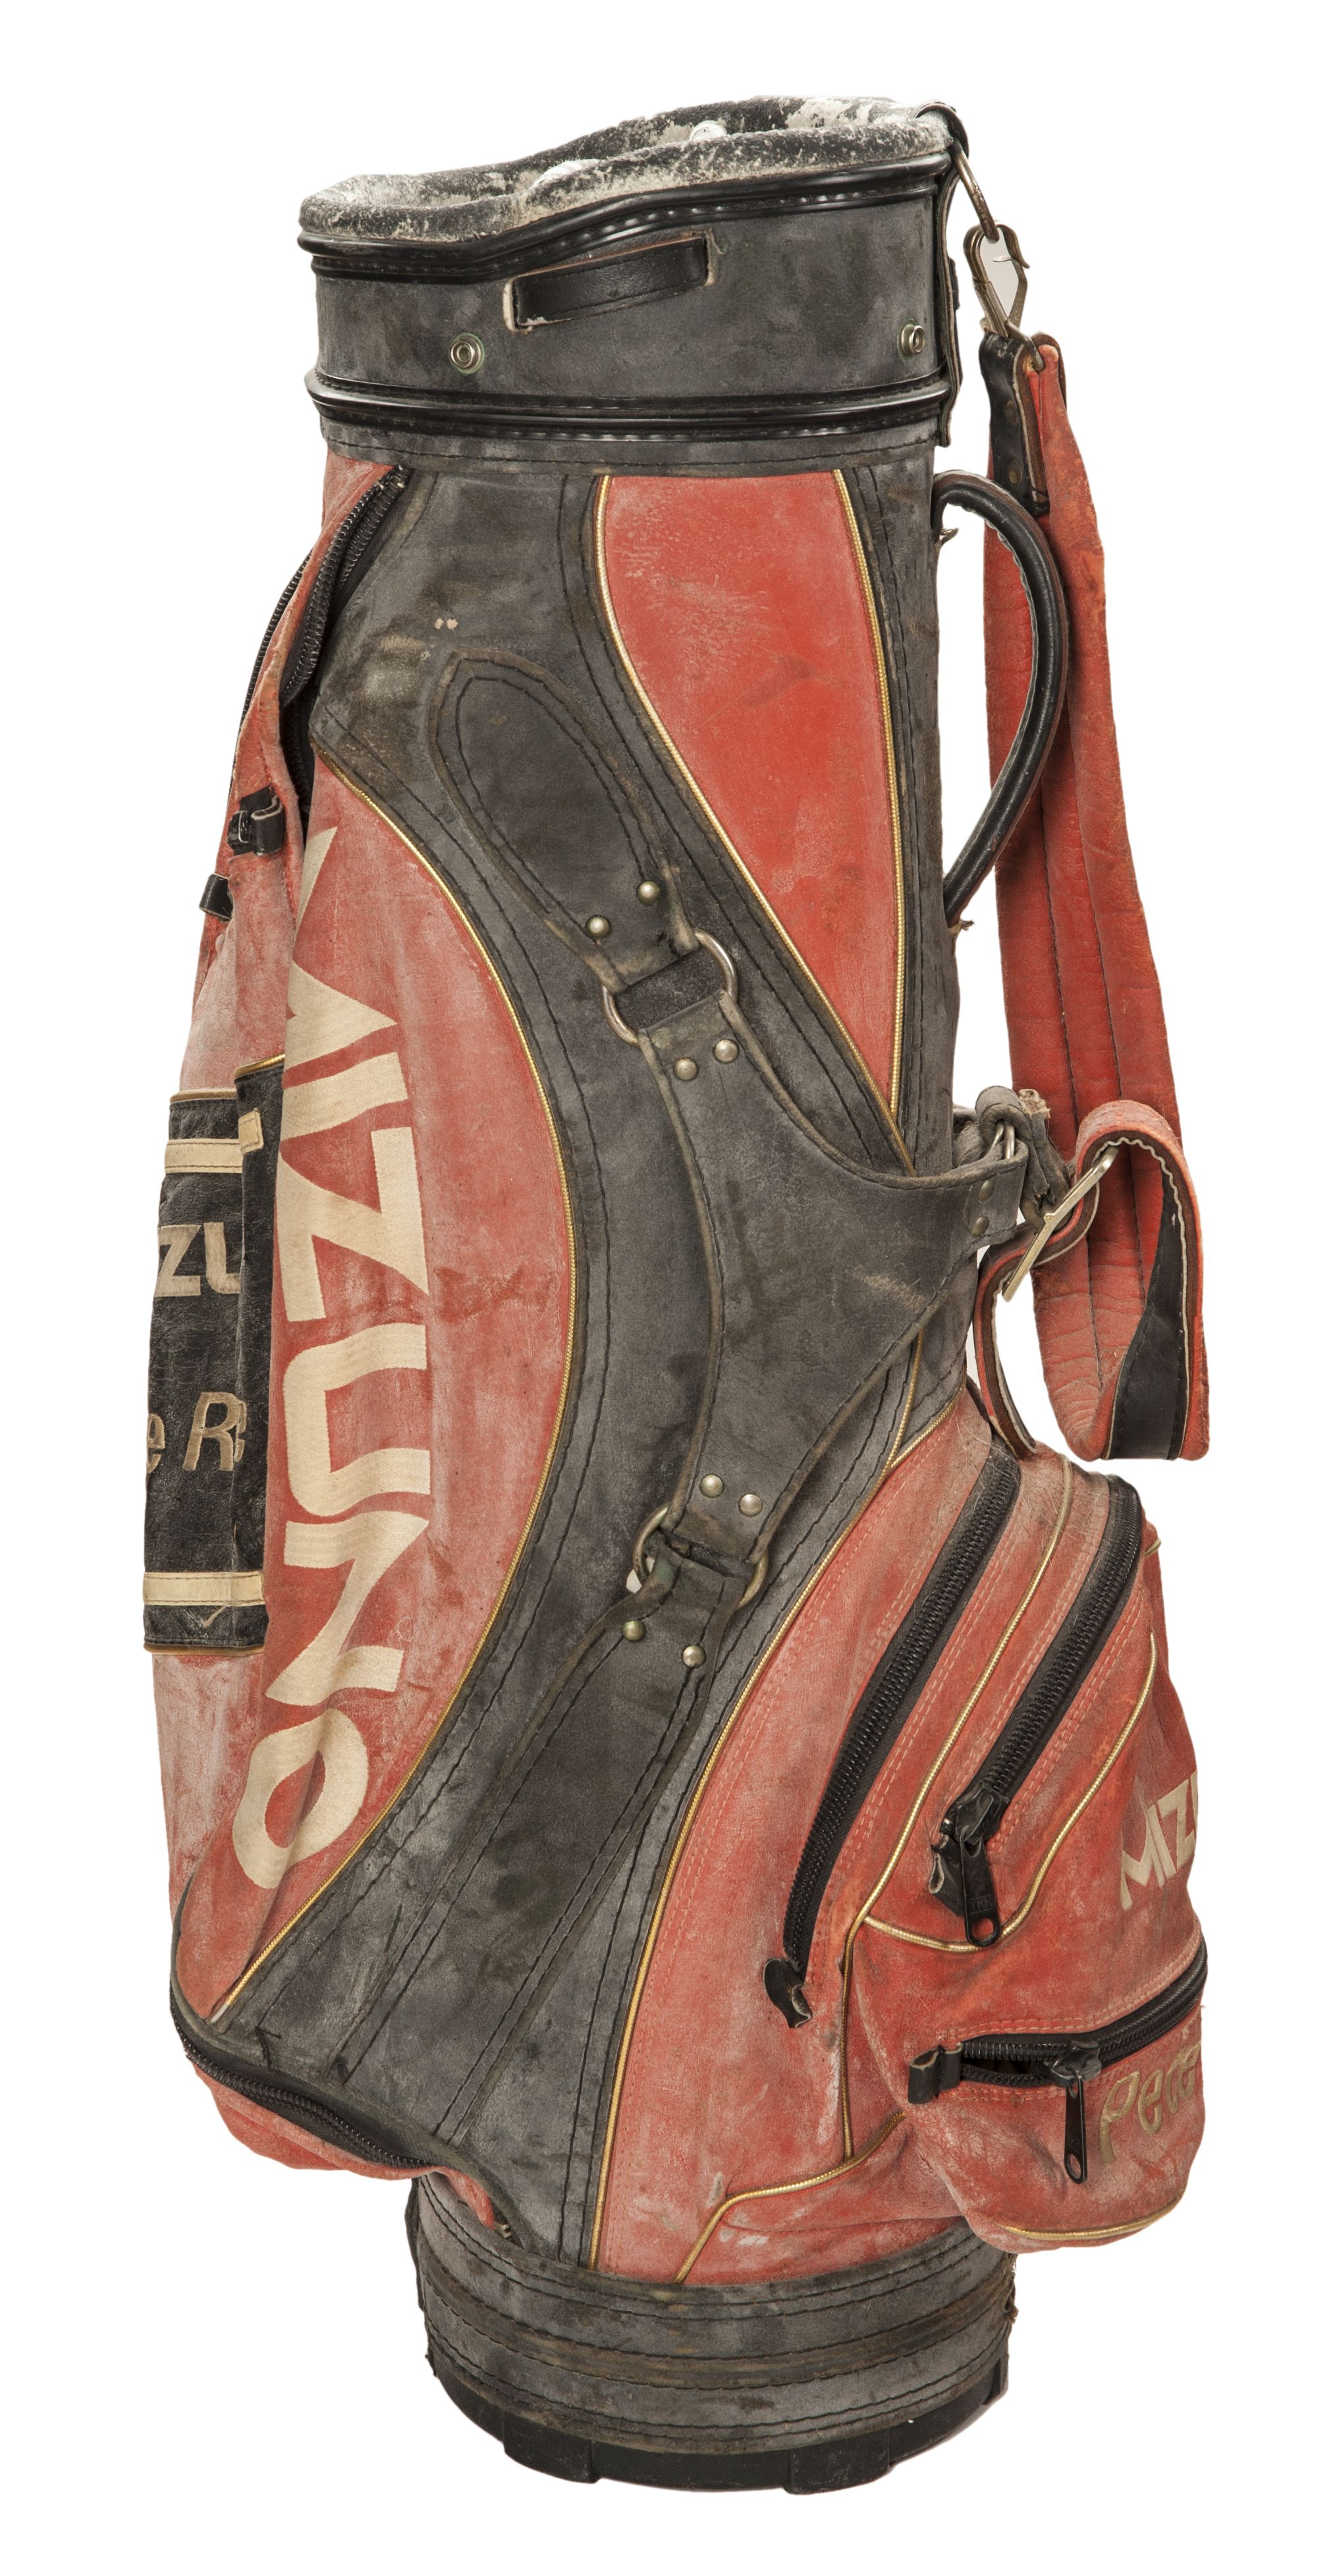 Used Golf Bags For Sale | Confederated Tribes of the Umatilla Indian Reservation